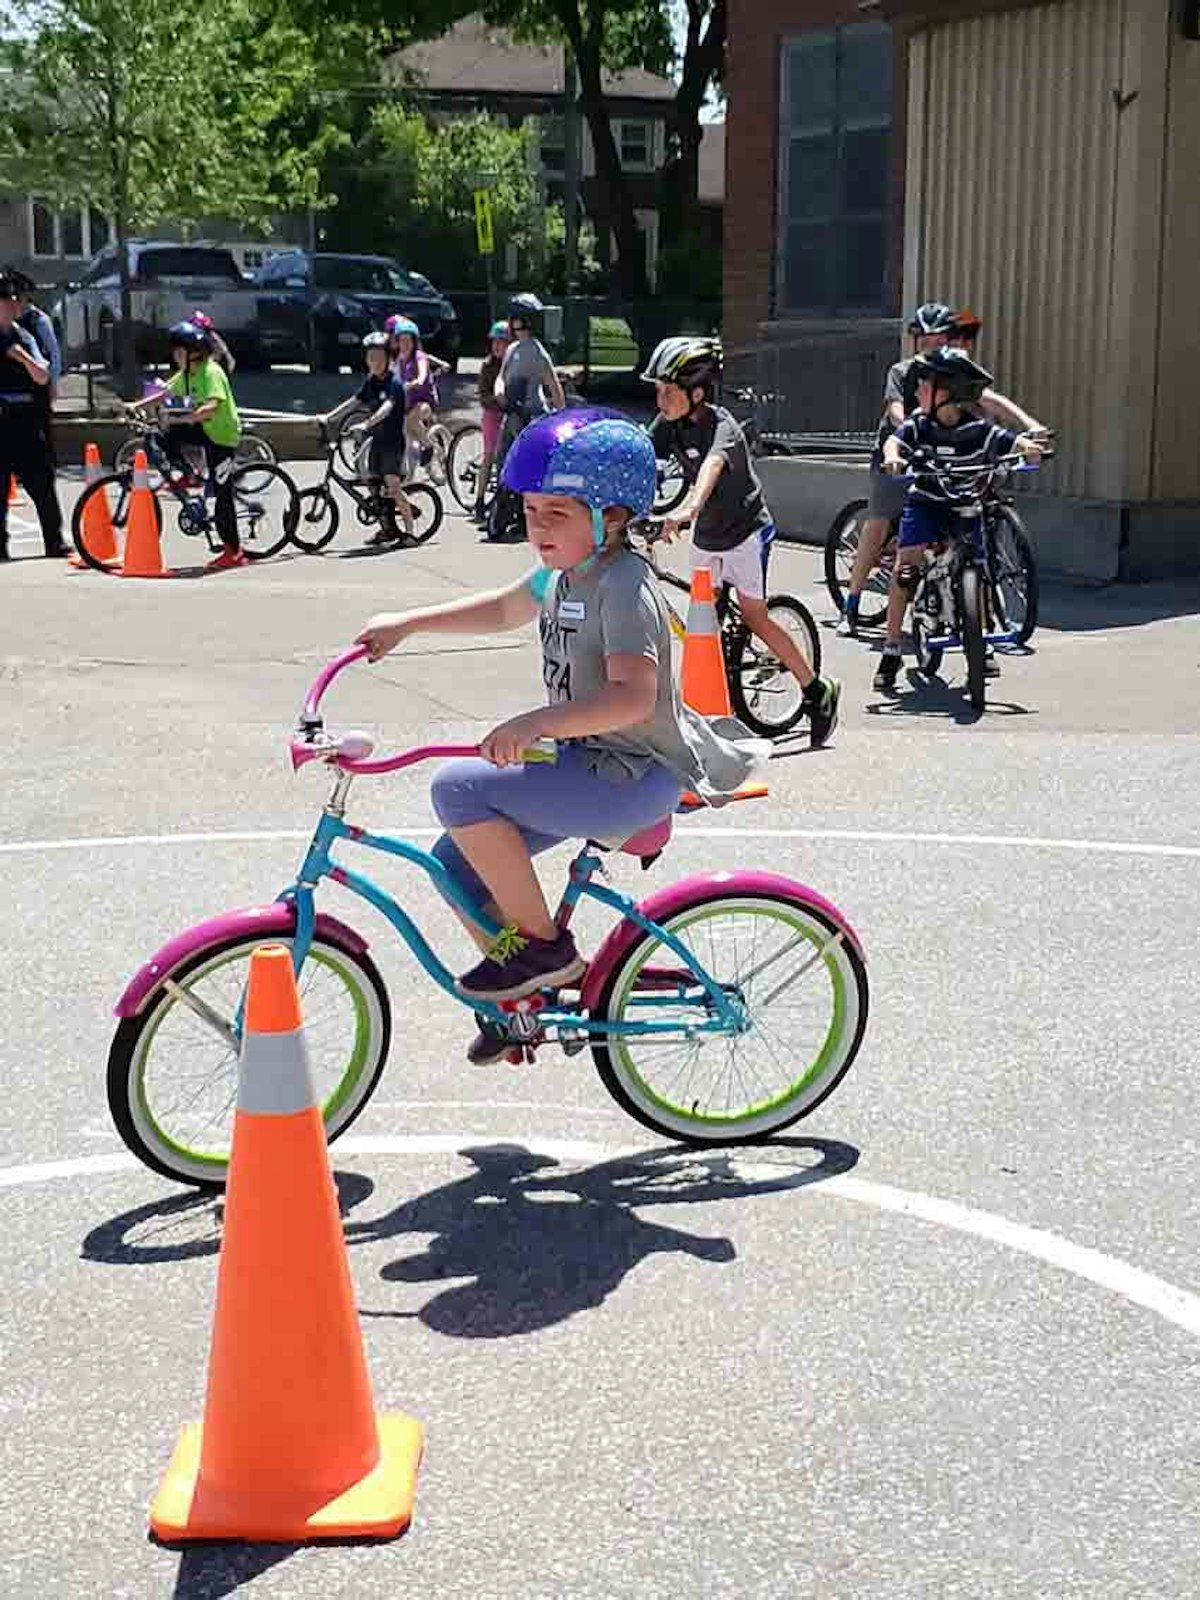 A young girl riding a bike in a group of cones.